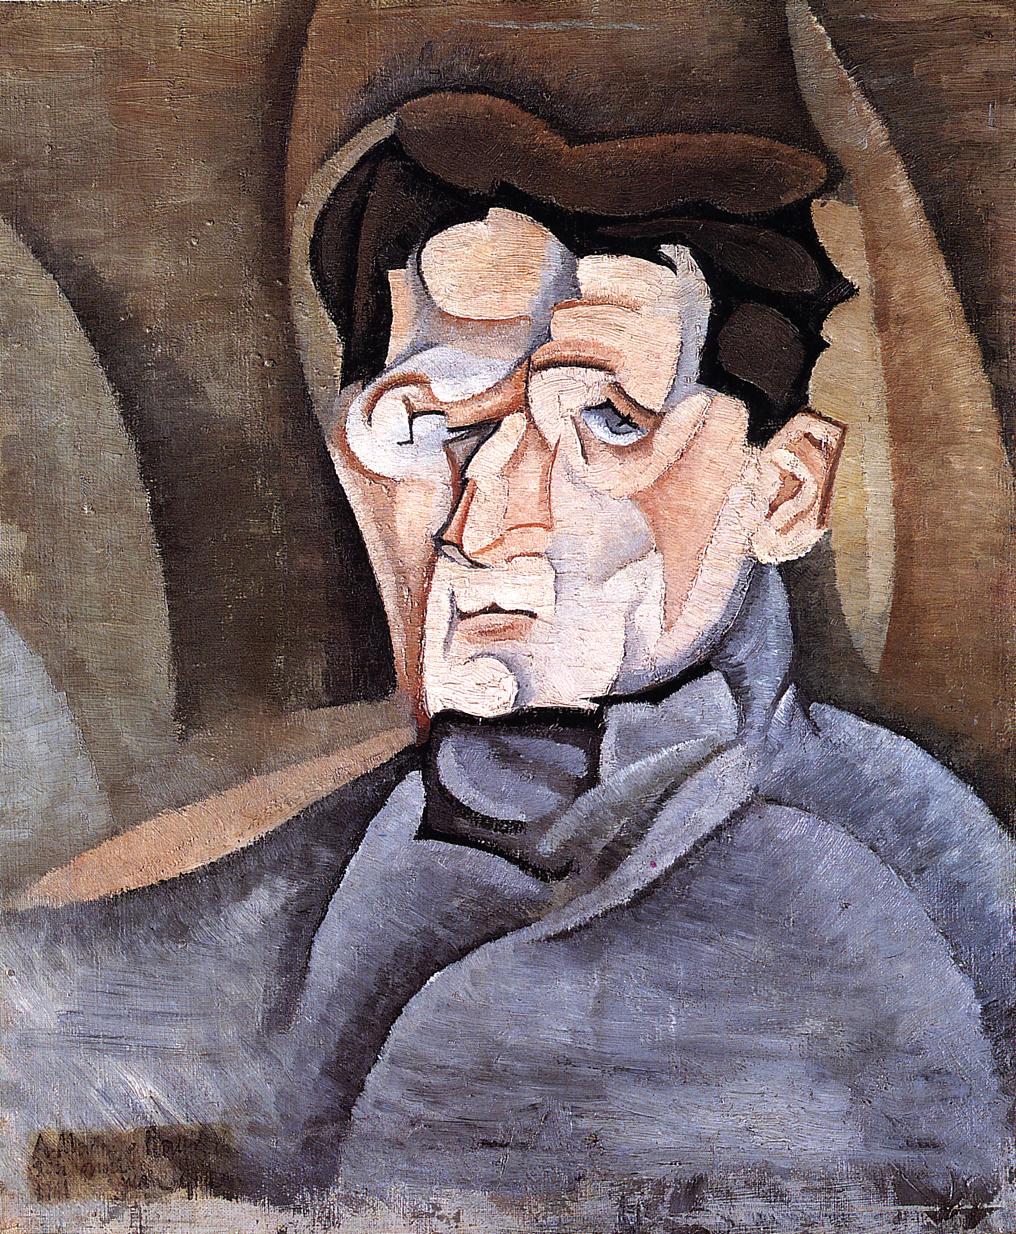 http://uploads2.wikiart.org/images/juan-gris/portrait-of-maurice-raynal-1911.jpg